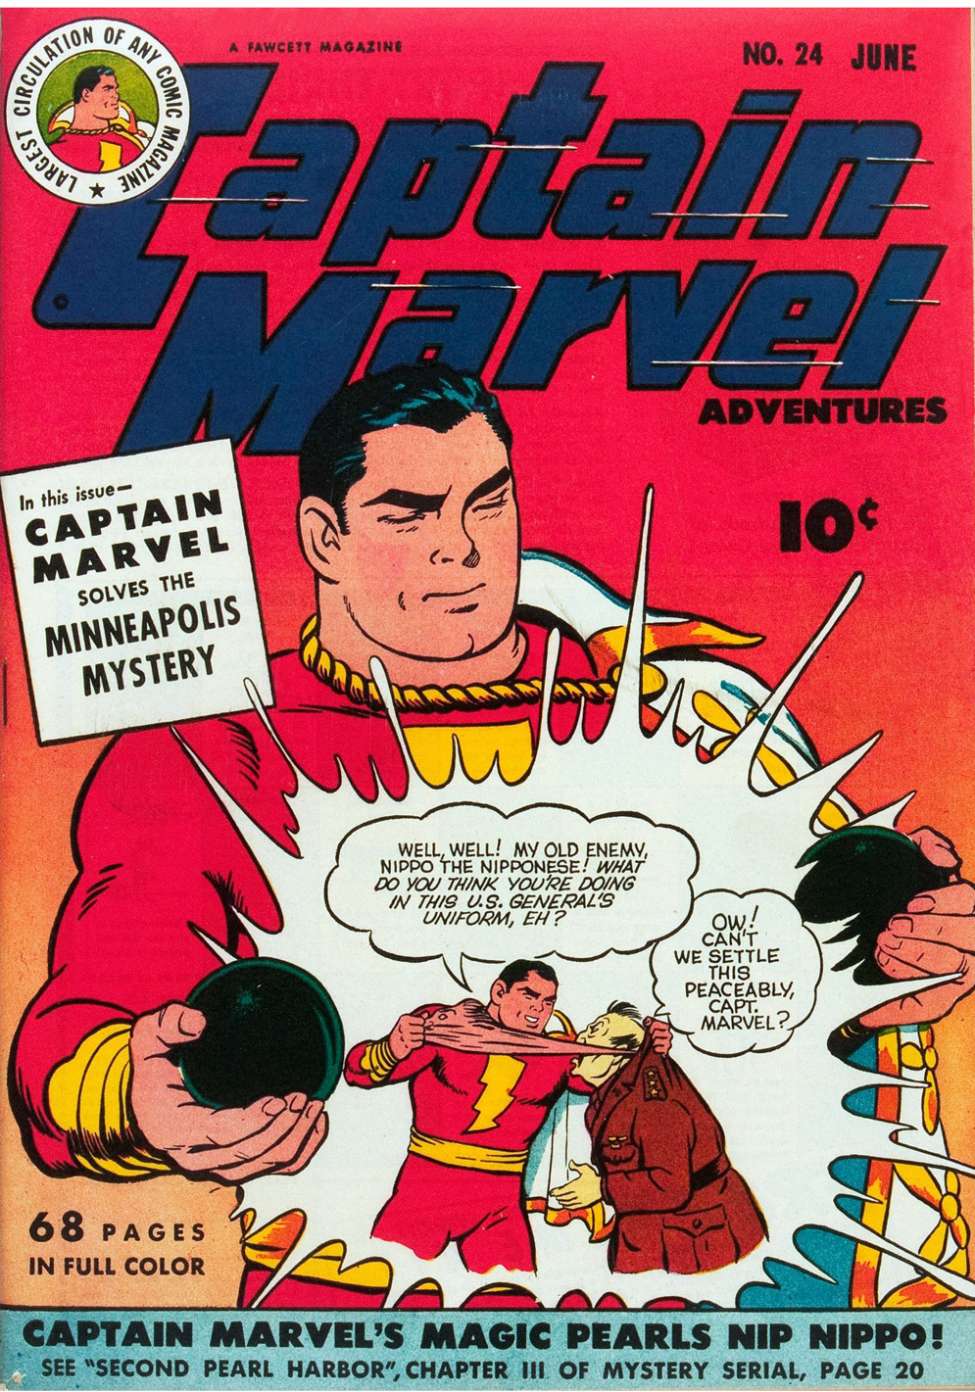 Book Cover For Captain Marvel Adventures 24